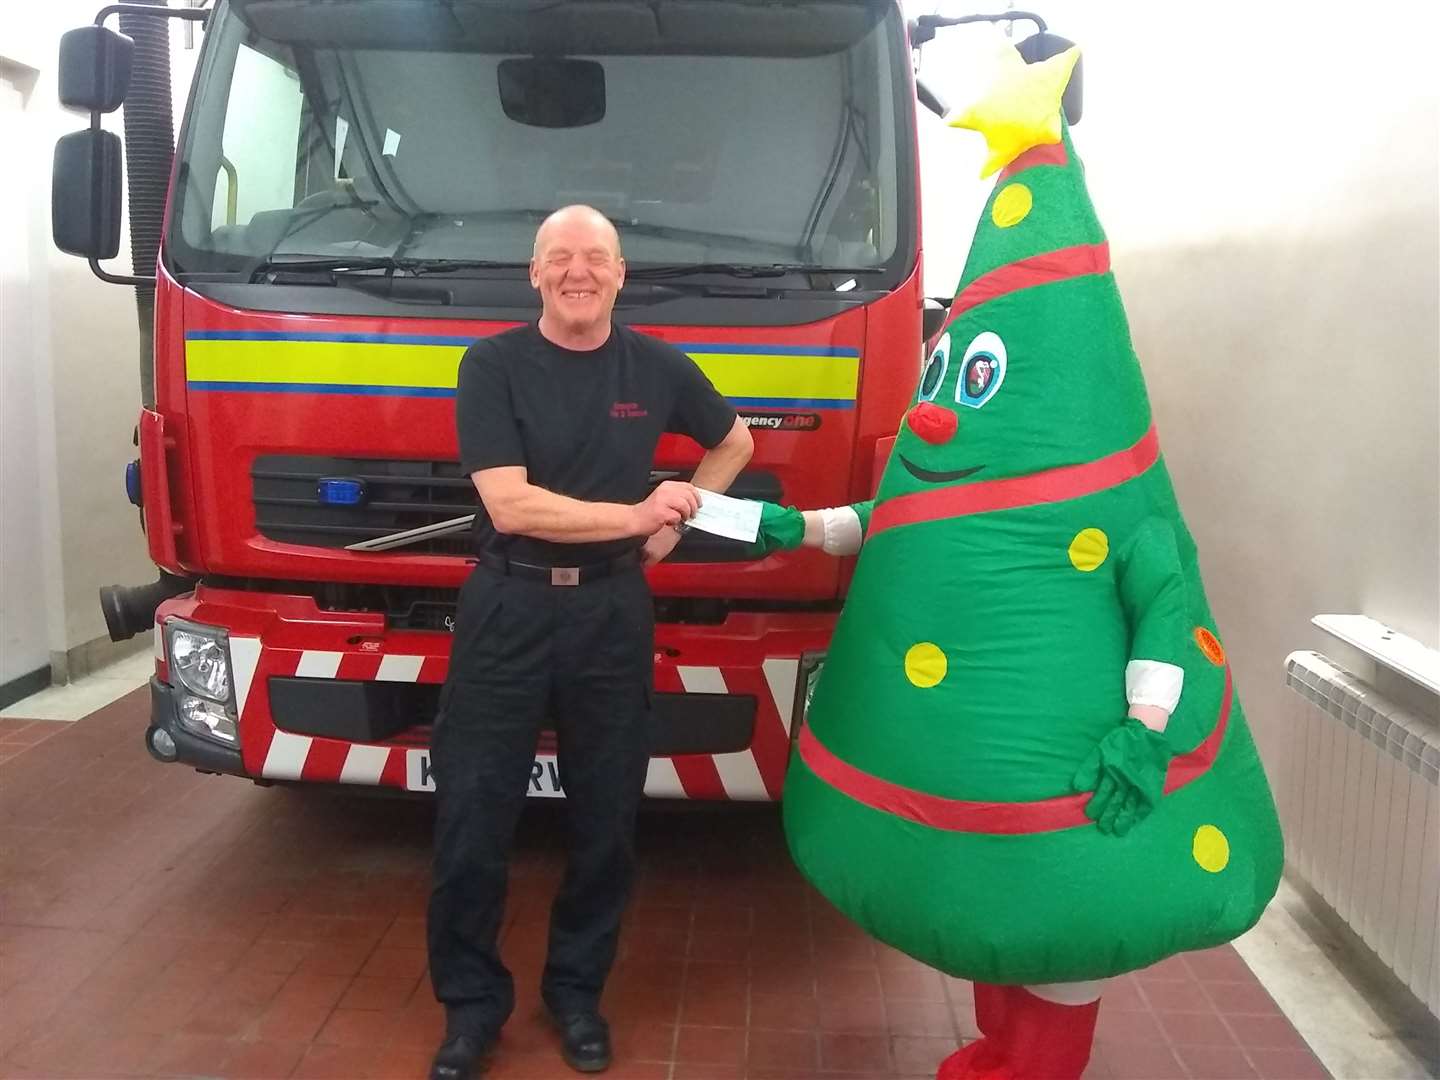 Moray Community Christmas’ mascot Sparkey (right) was donated by the Scottish Fire and Rescue Service and attends all of the dinners.